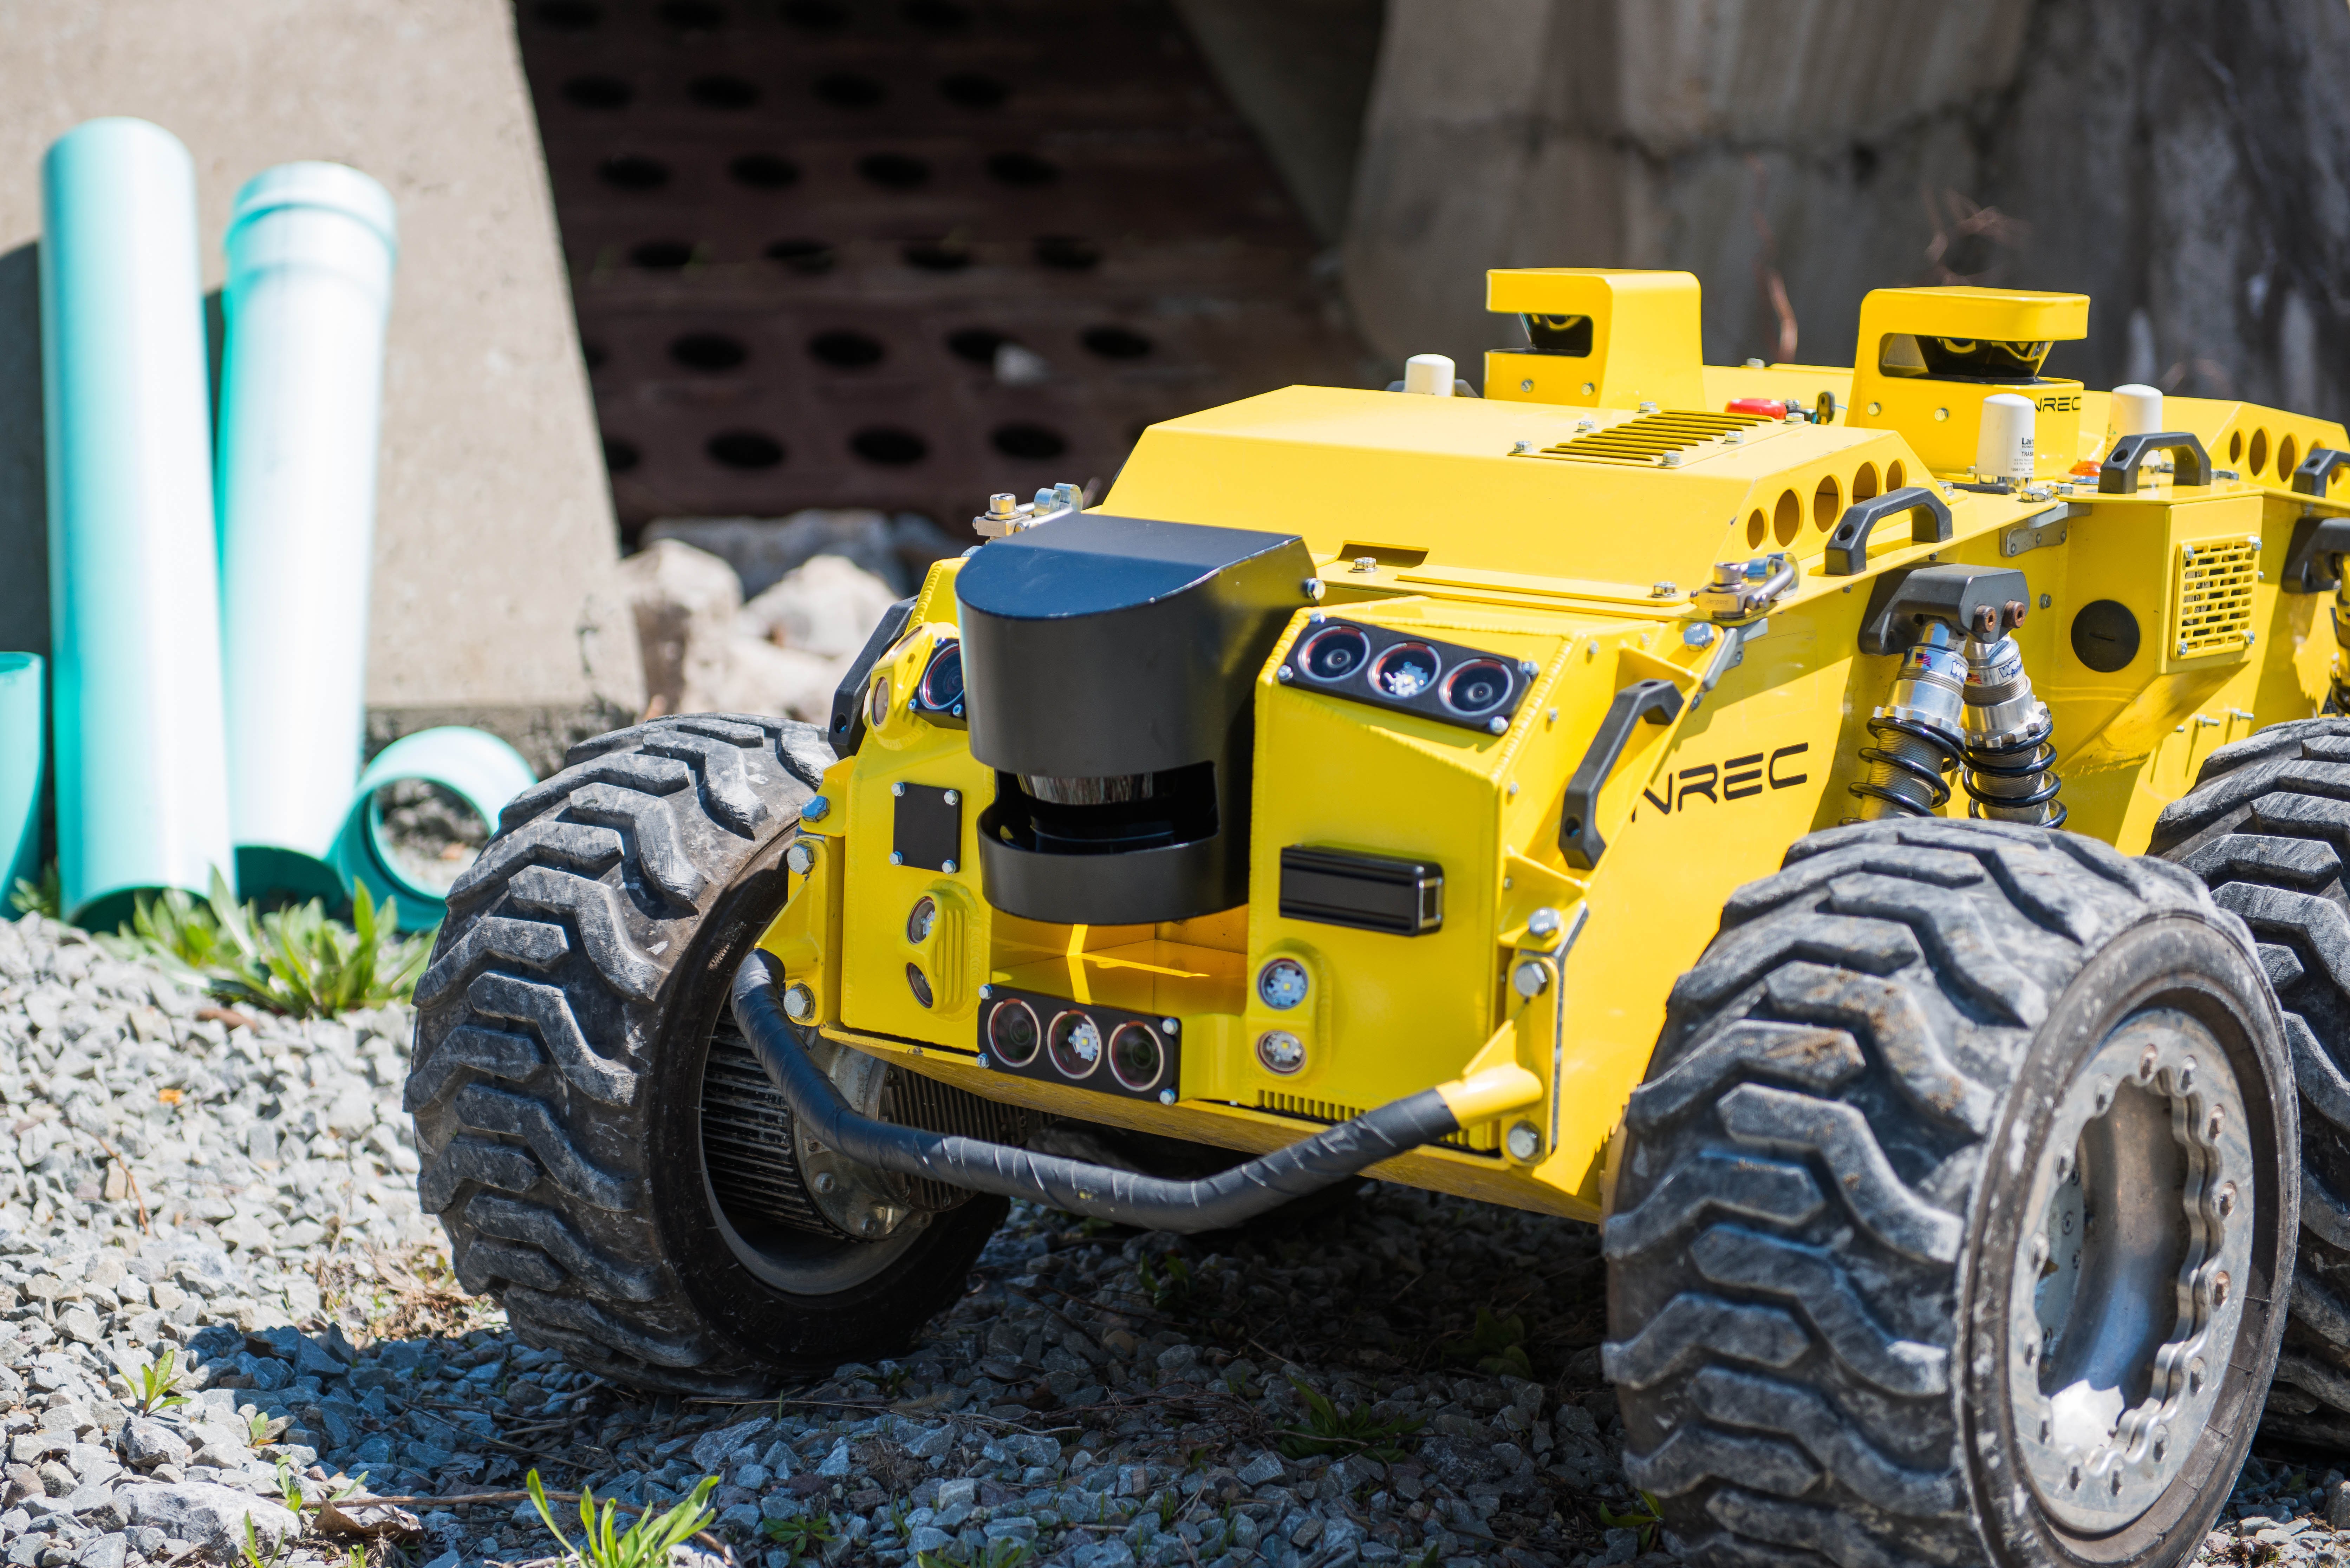 Profiler is a mine-mapping robot developed by NREC for Anglo American, one of the world's largest mining companies